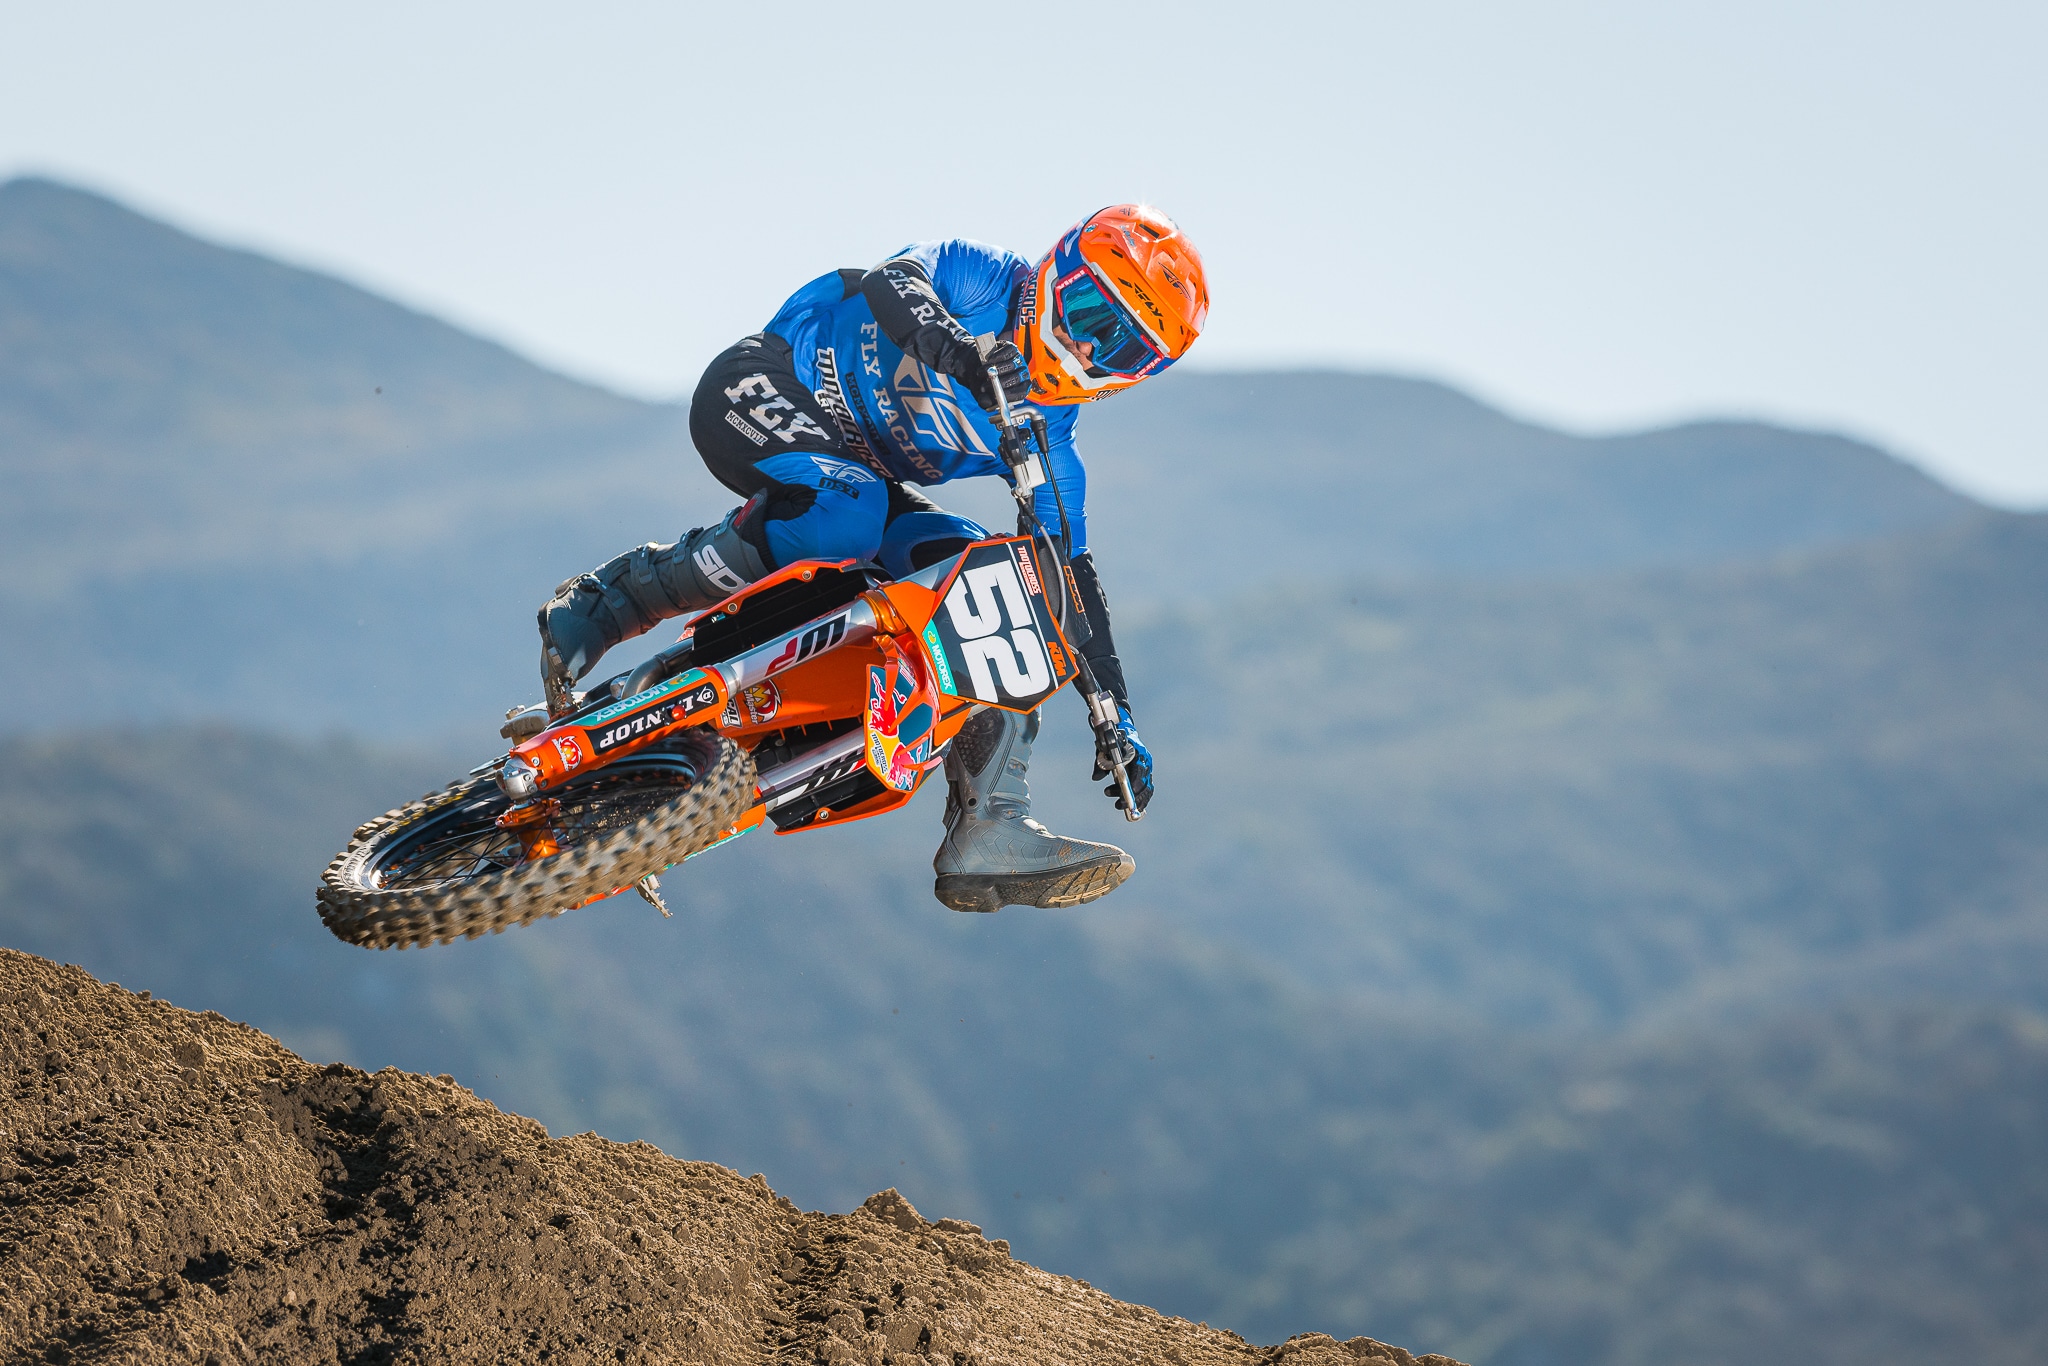 MXA RACE TEST: THE REAL TEST OF THE 2022-1/2 KTM 450SXF FACTORY